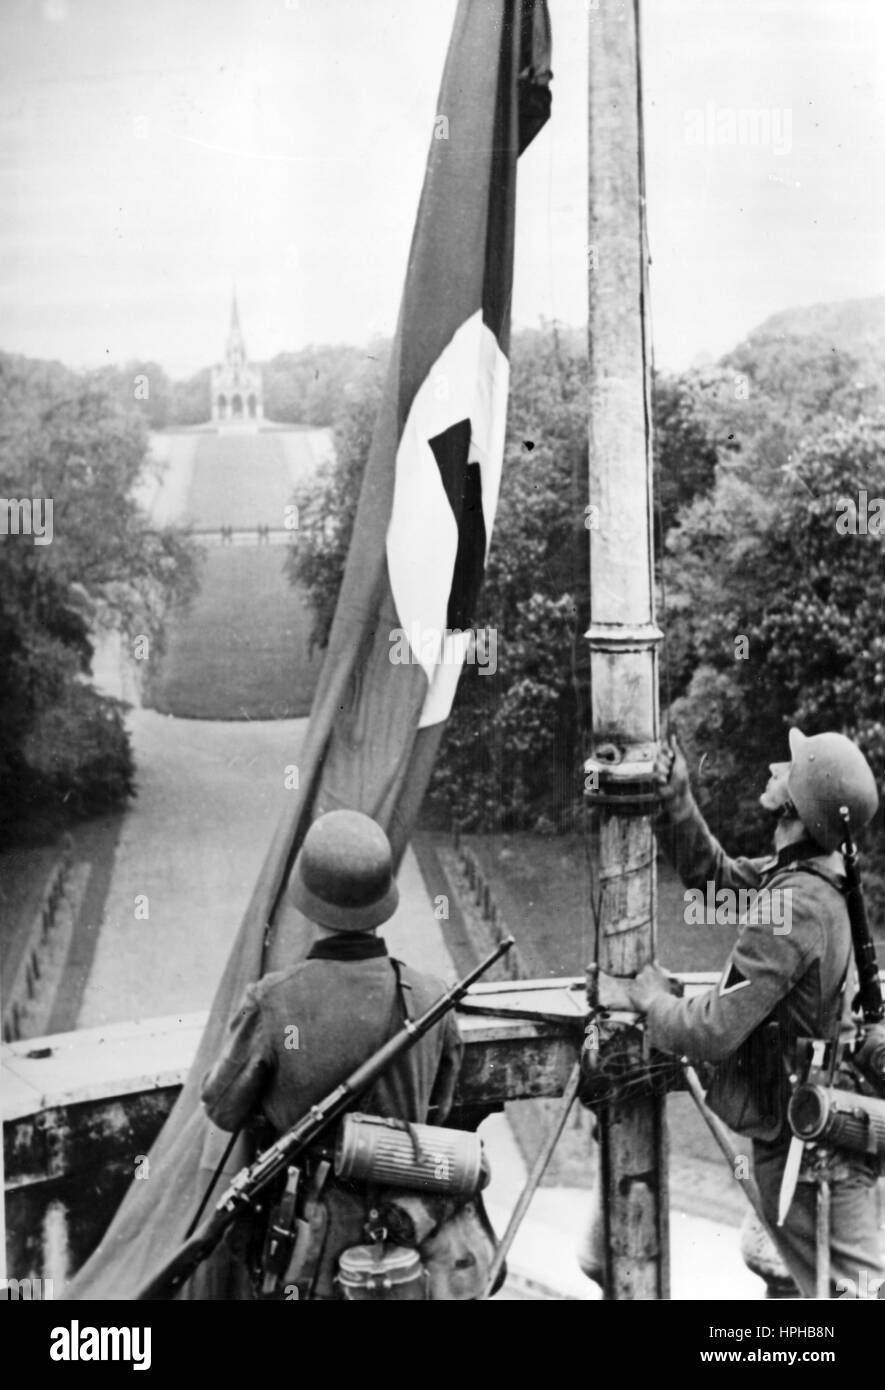 The Nazi propaganda image shows German Wehrmacht soldiers next to a raised Swastika flag on the roof of the Belgian Royal Palace of Laeken in occupied Brussels, Belgium. Taken in May 1940. Fotoarchiv für Zeitgeschichte - NO WIRE SERVICE - | usage worldwide Stock Photo